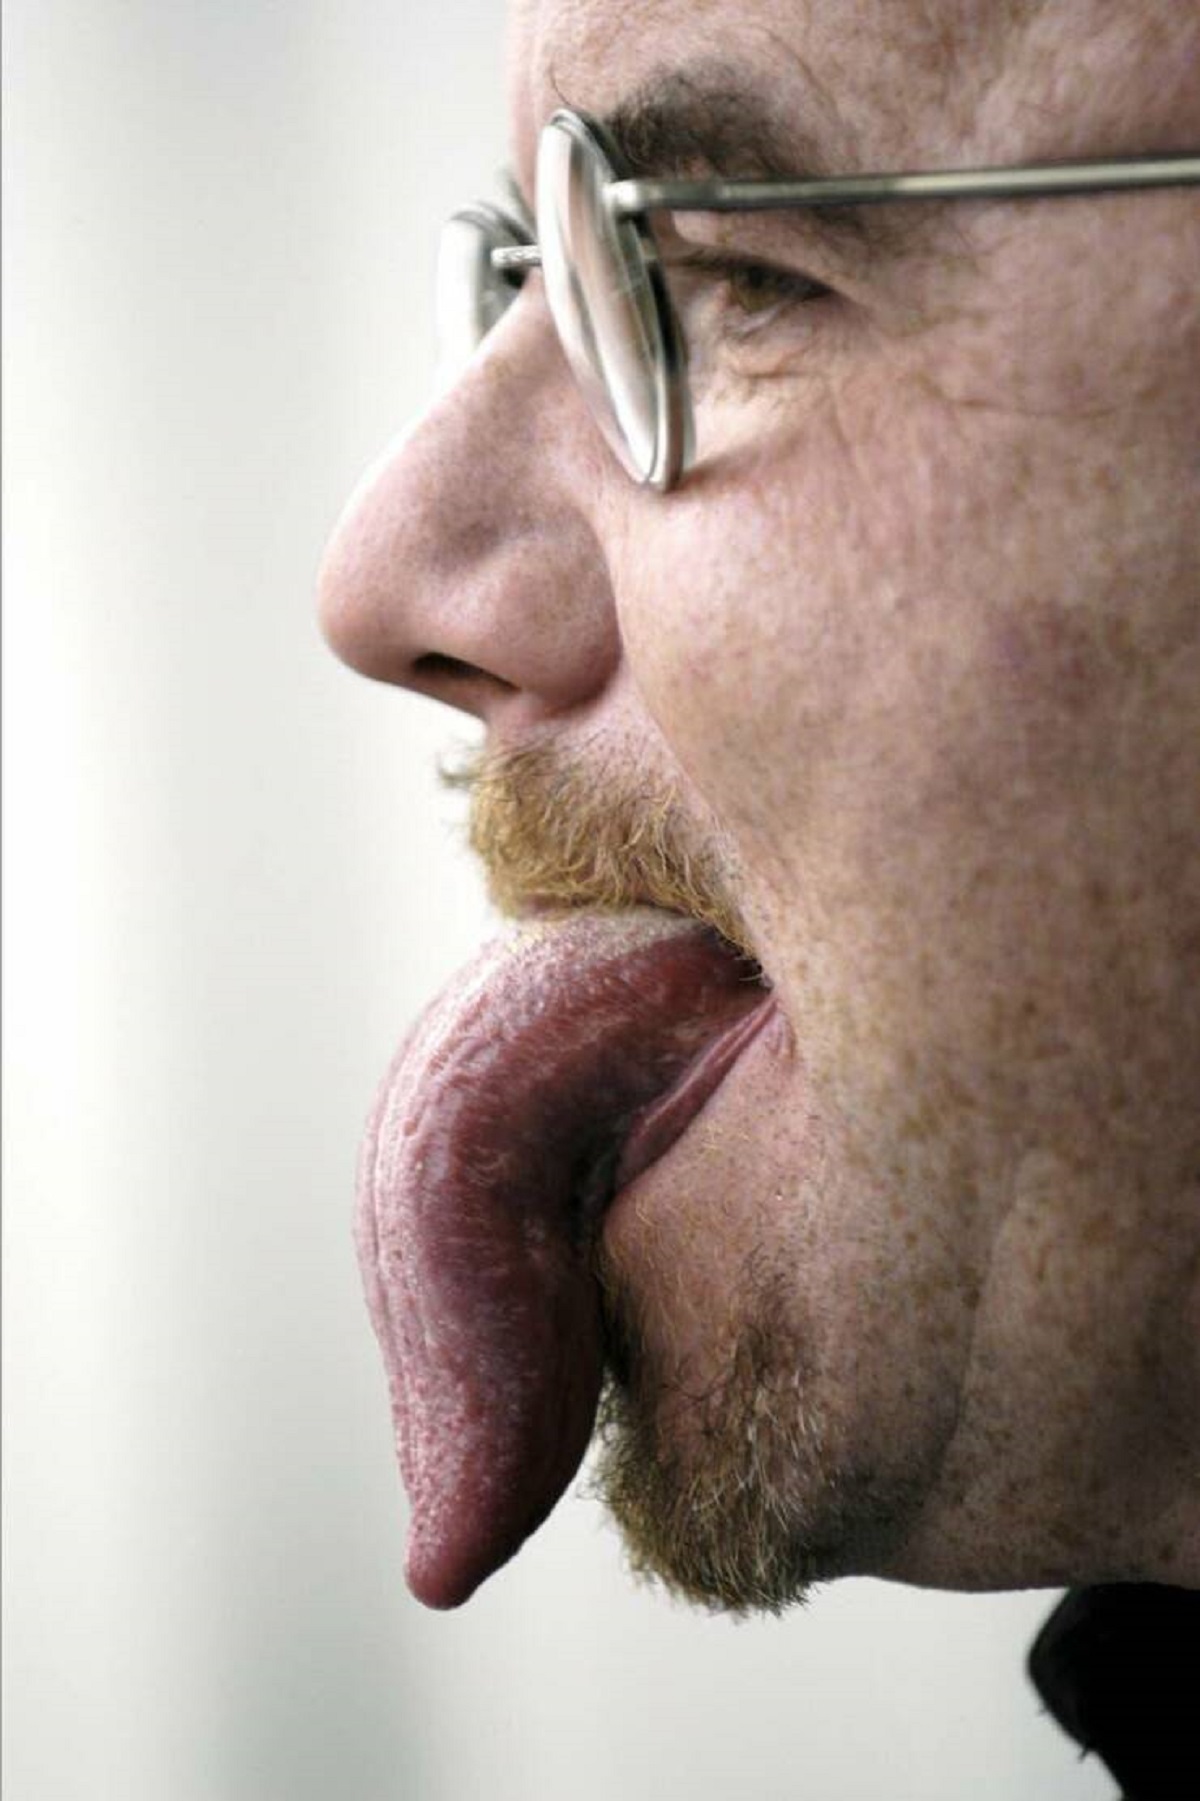 This is Stephen Taylor, the man with the world's longest tongue: